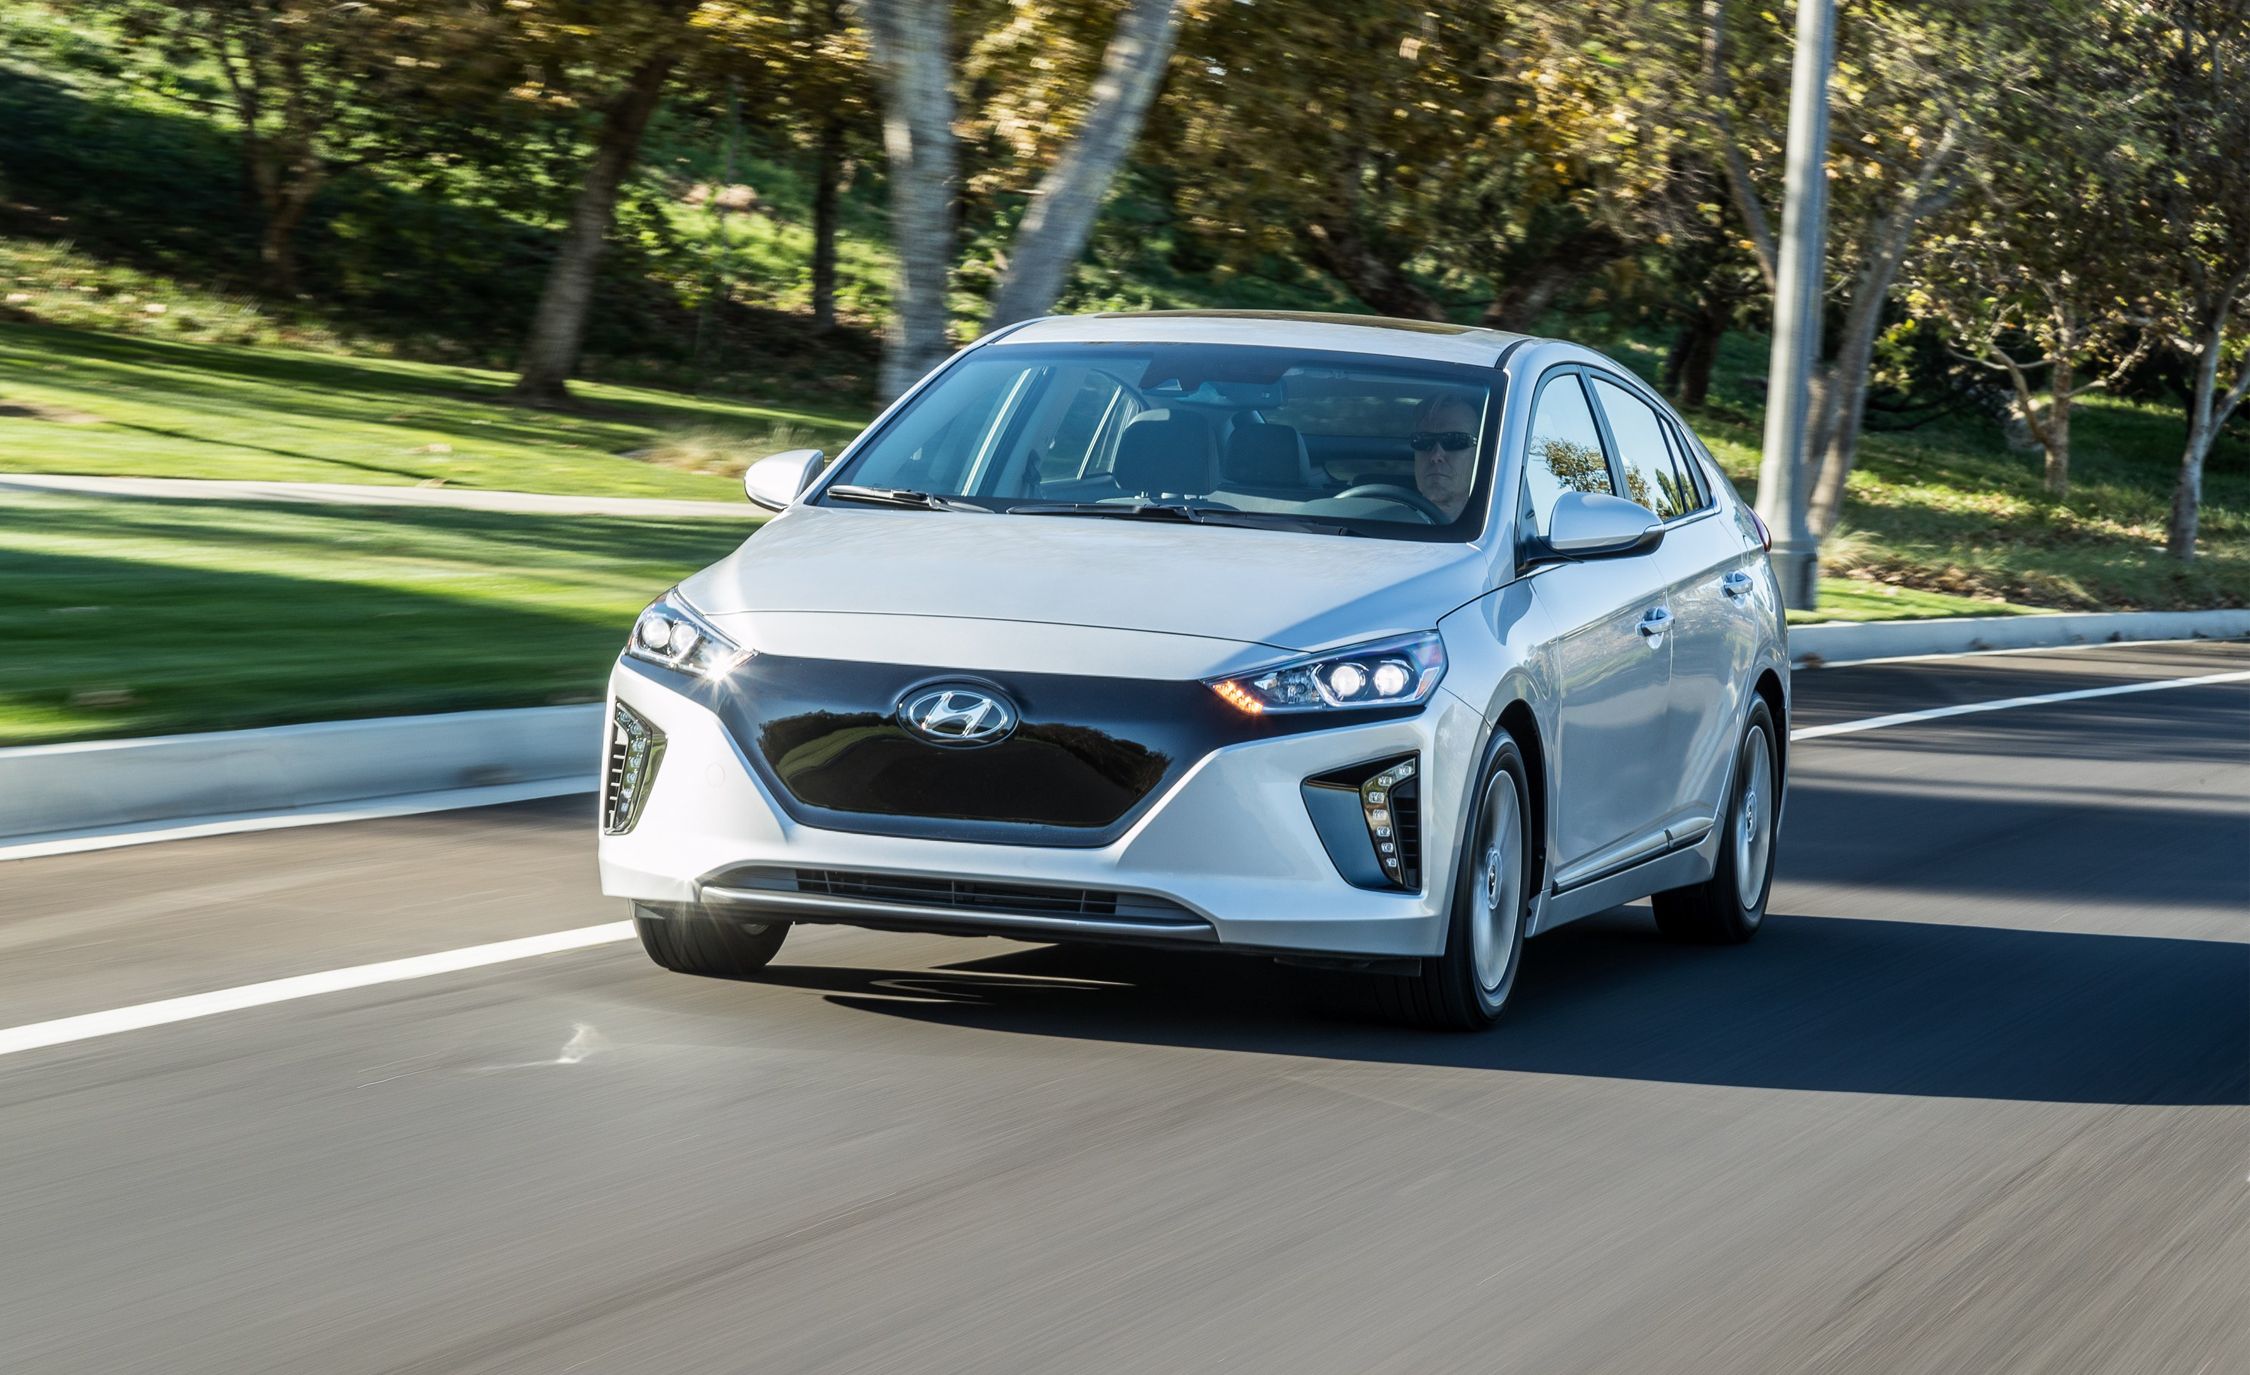 https://hips.hearstapps.com/hmg-prod/amv-prod-cad-assets/images/17q1/674167/2017-hyundai-ioniq-electric-first-drive-review-car-and-driver-photo-674683-s-original.jpg